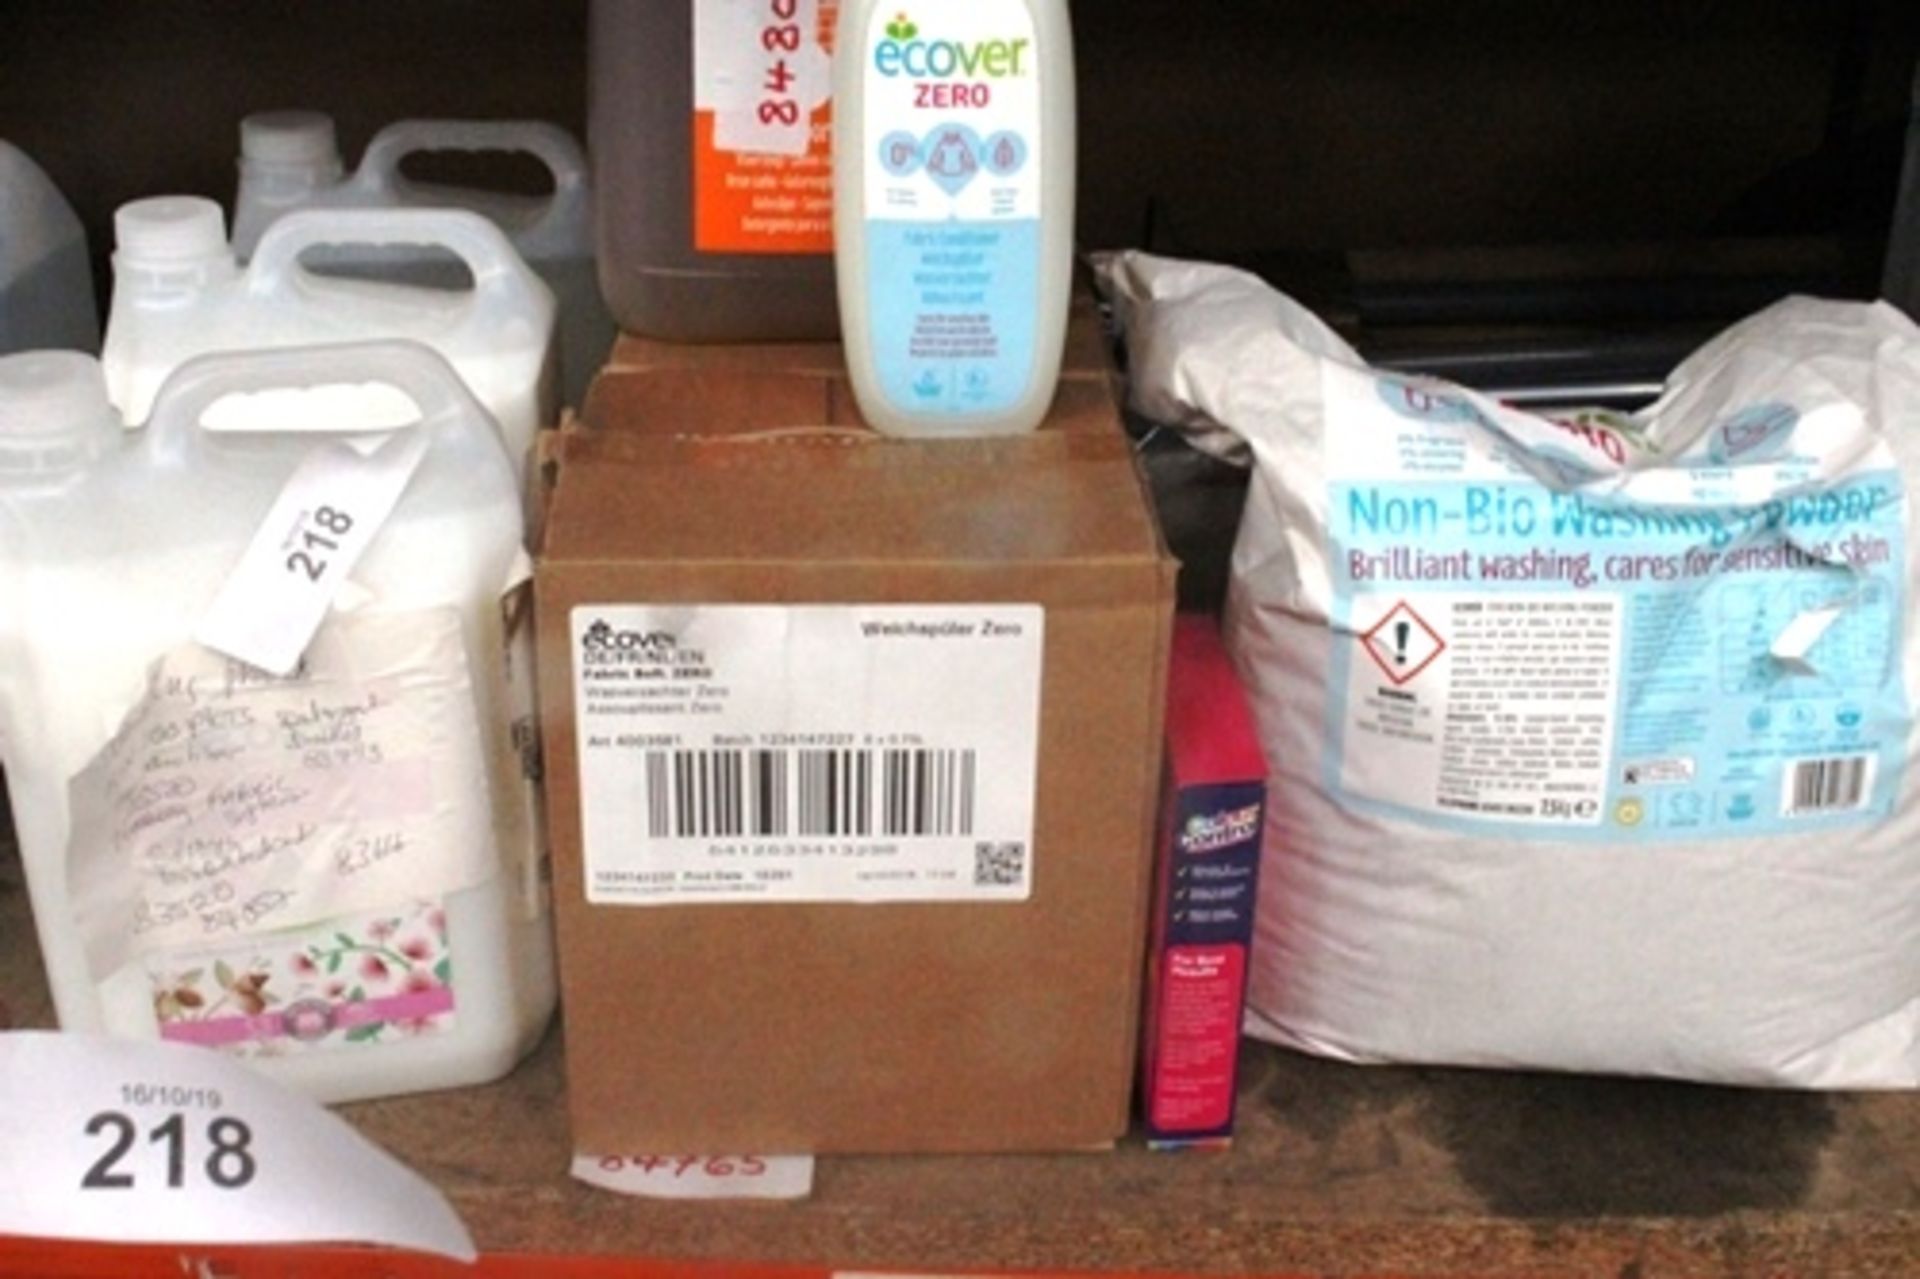 A quantity of Ecover products including 7.5kg of washing powder, 12 x 750ml fabric conditioner, 2